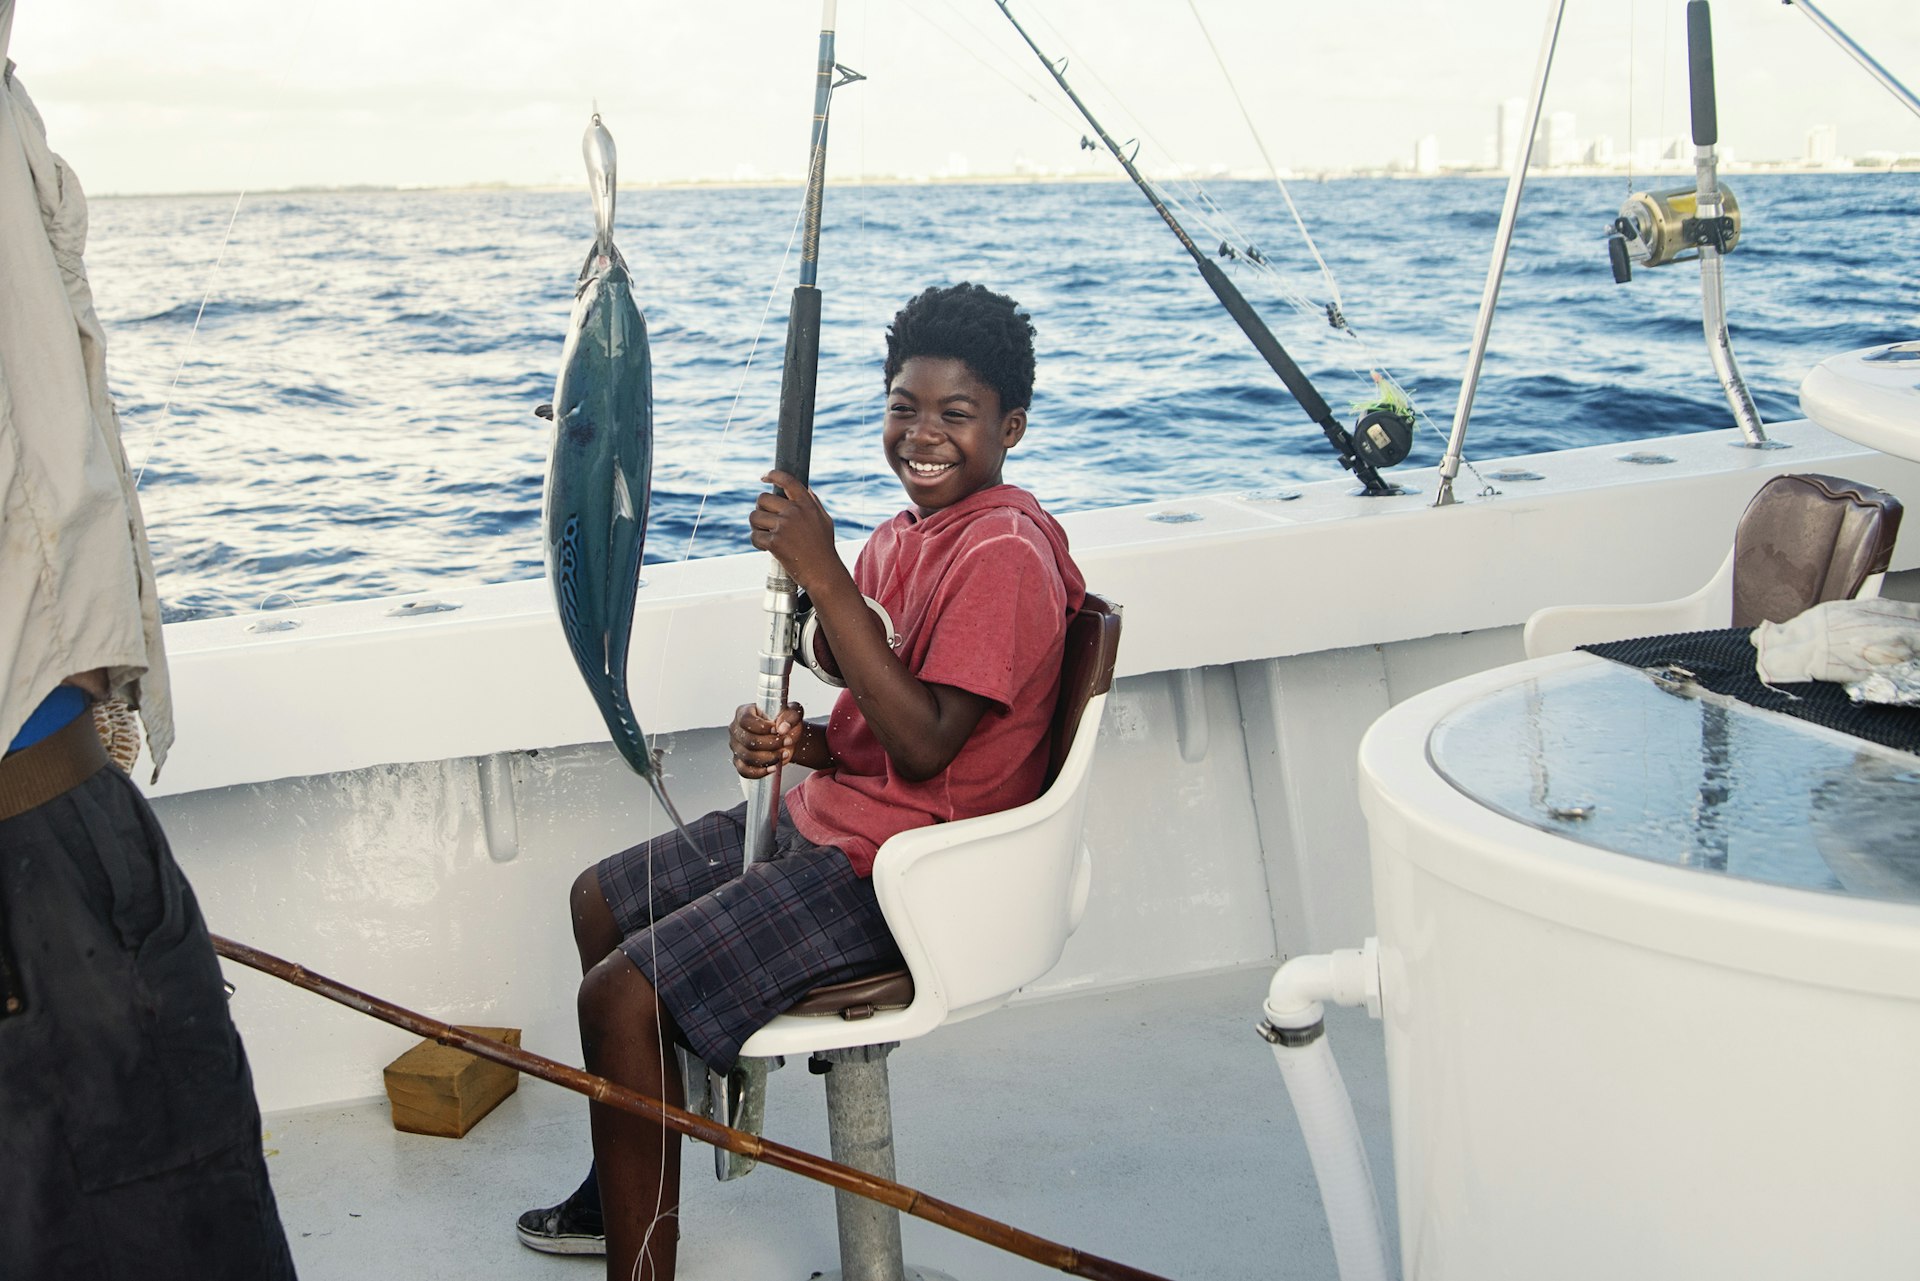 A preteen boy smiles as he catches a fish out on a boat that's gone deep-sea fishing